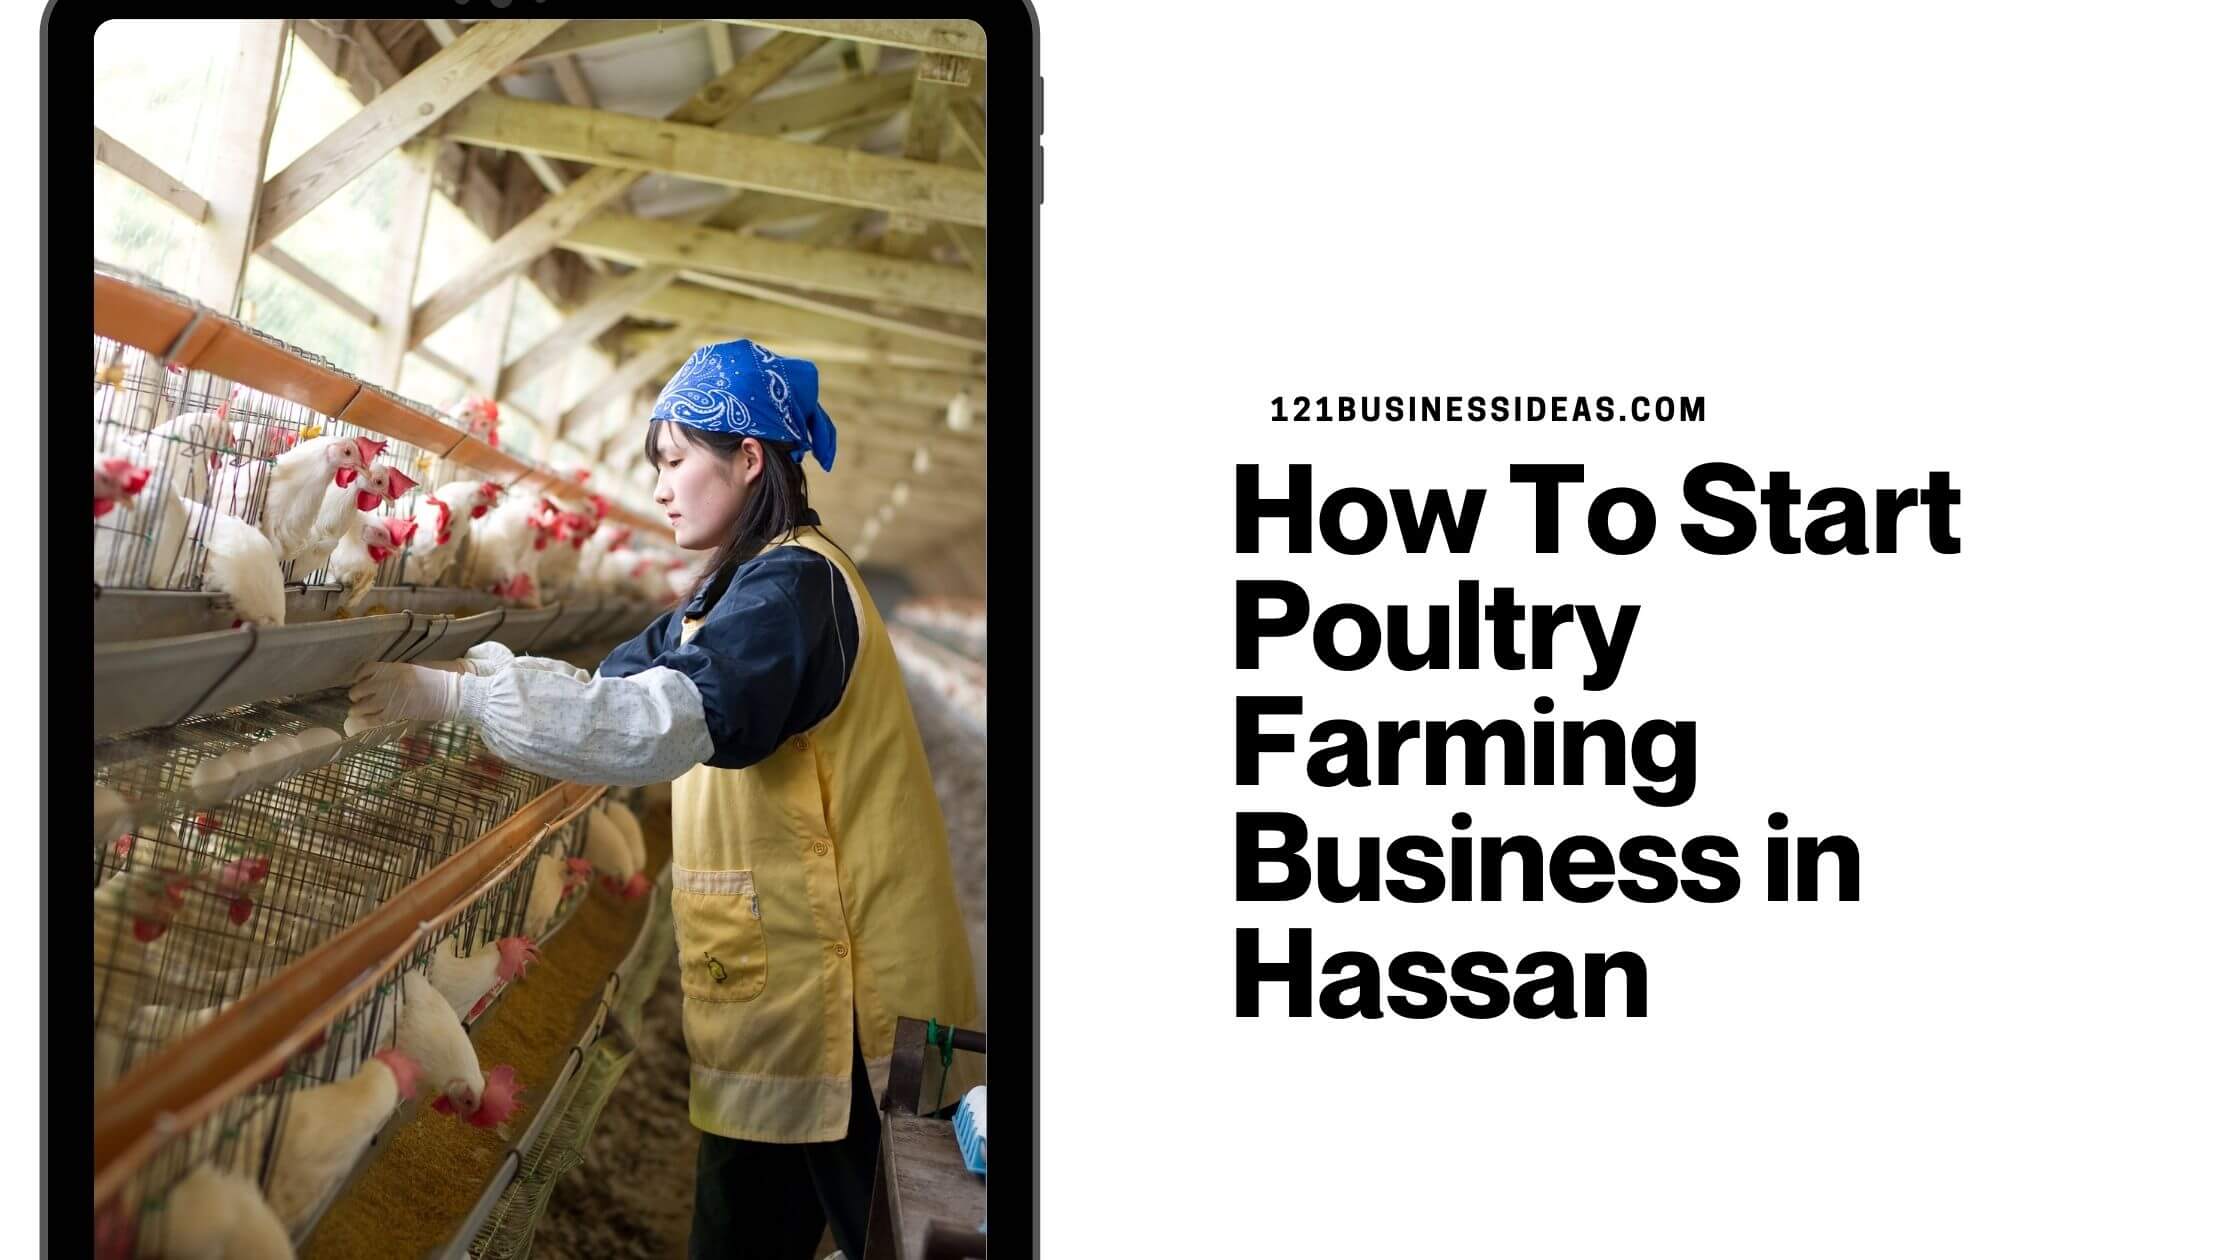 How To Start Poultry Farming Business in Hassan (1)